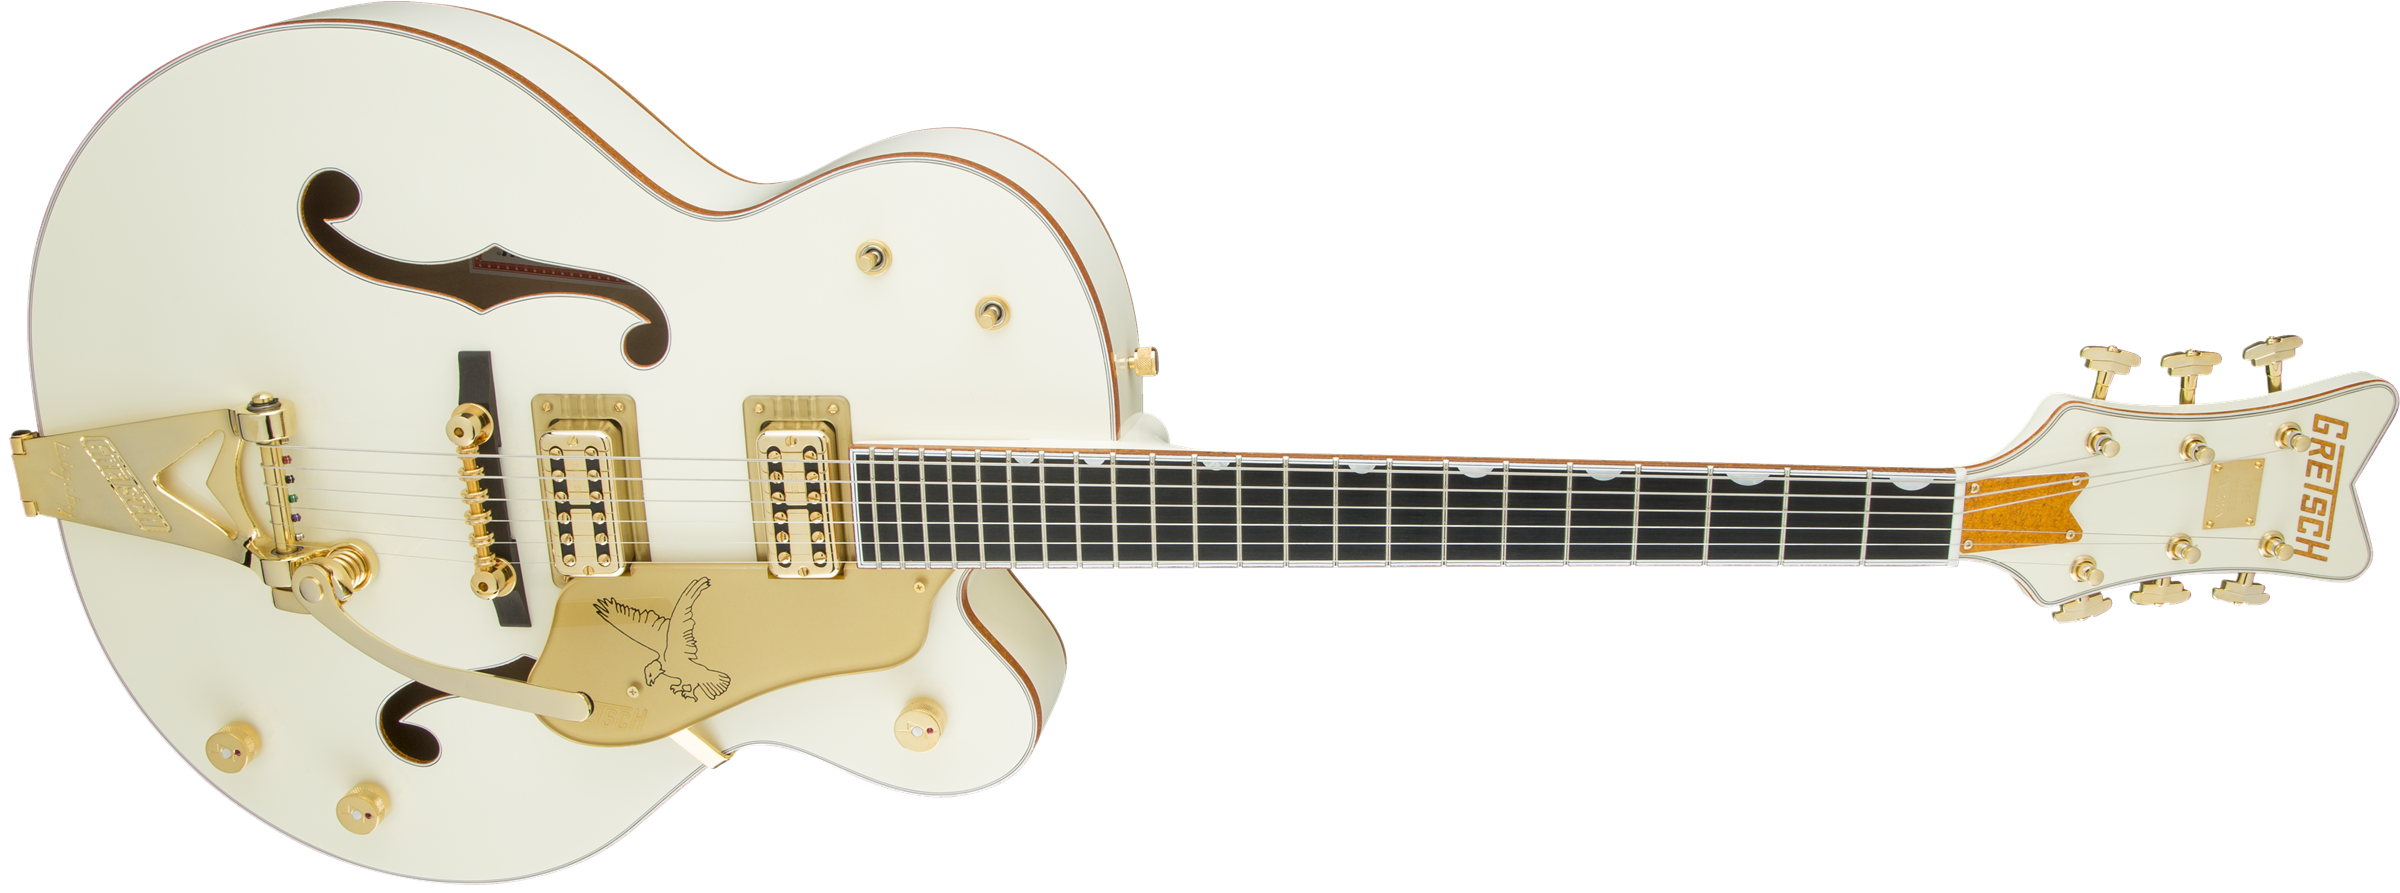 Electric Instruments Guitar Gretsch Falcon White Musical Clipart